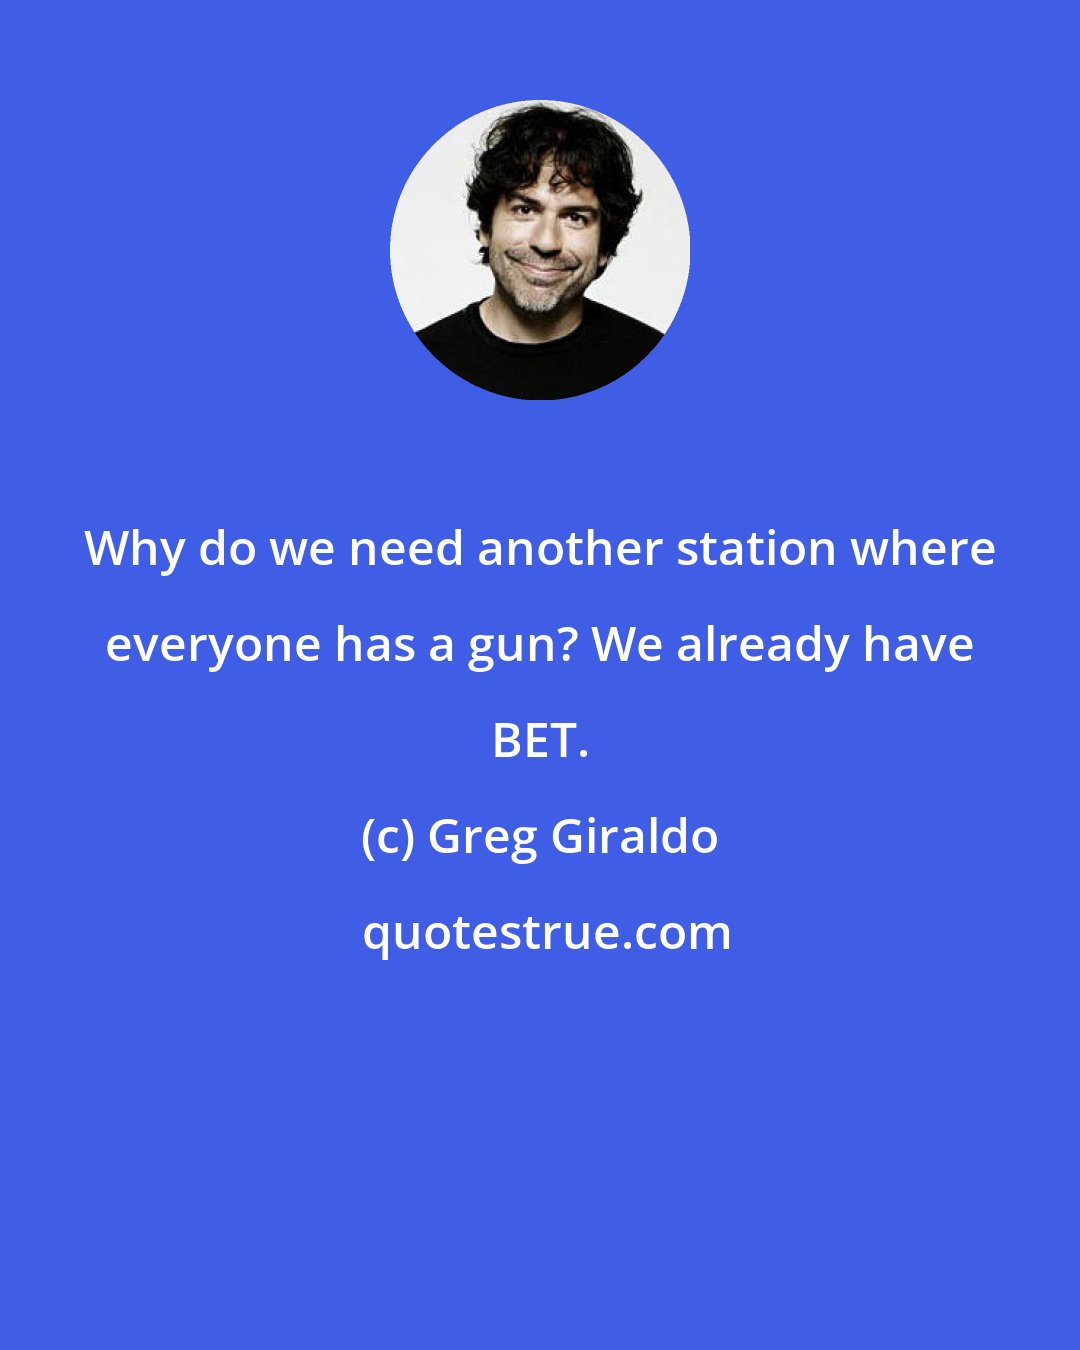 Greg Giraldo: Why do we need another station where everyone has a gun? We already have BET.